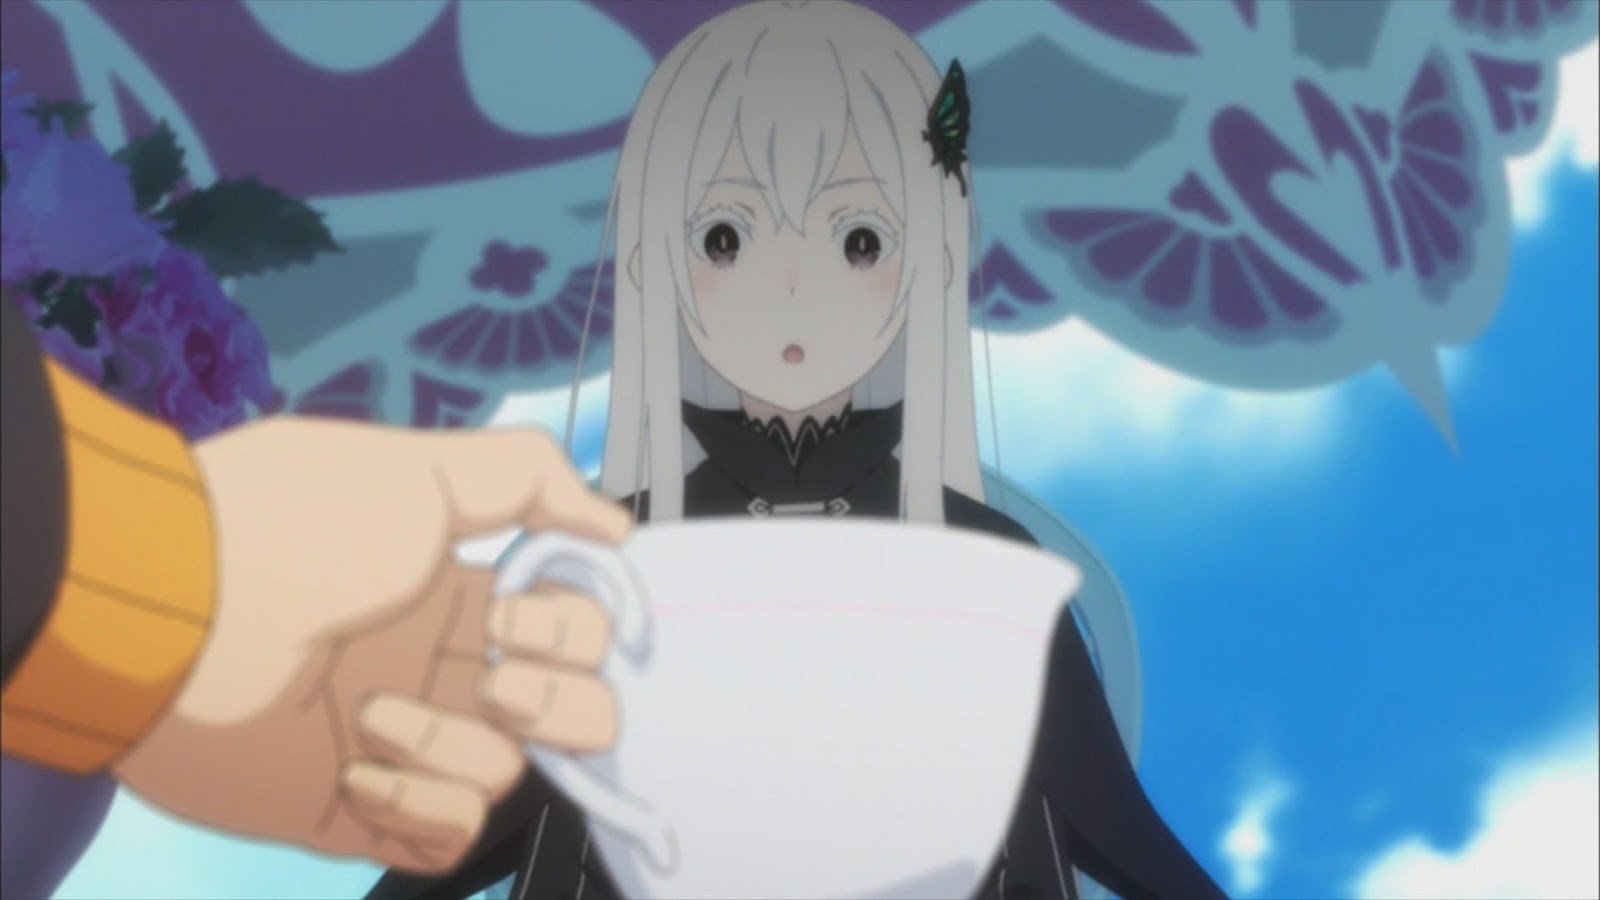 Dating Sim Gone Wrong – Re: Zero S1 Episode 3 Review – In Asian Spaces